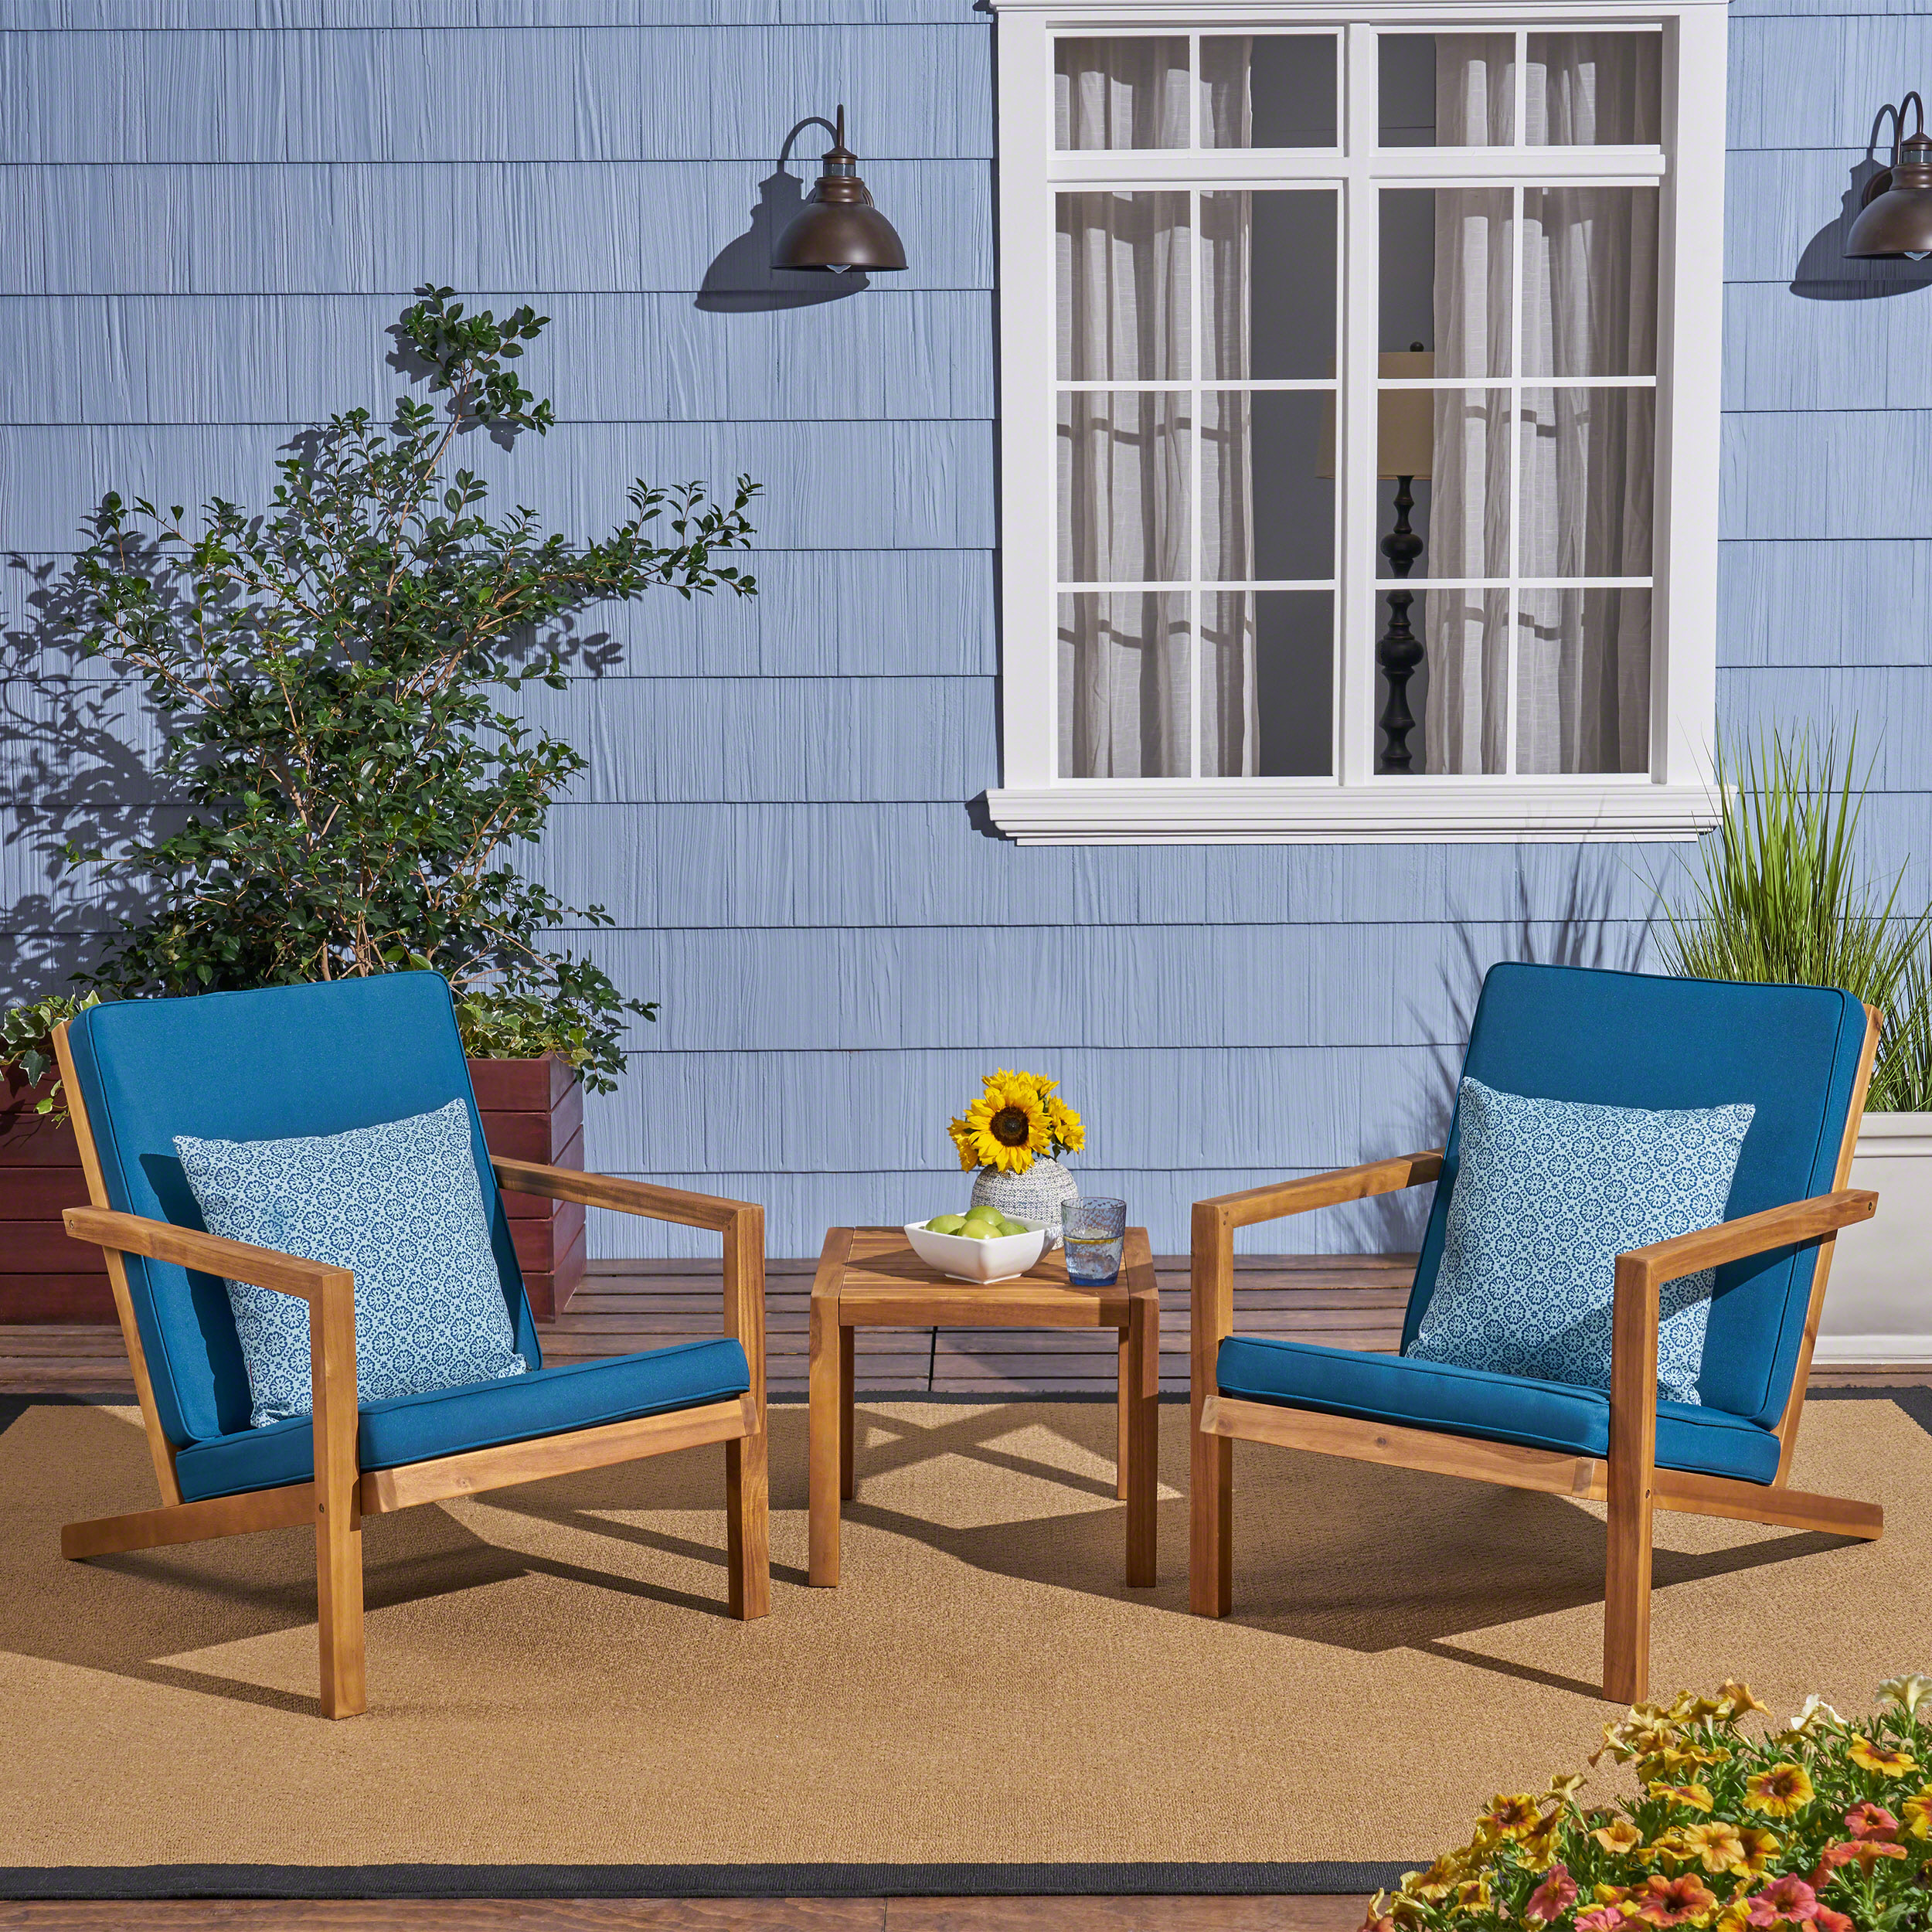 Remi Outdoor 3 Piece Acacia Wood Chat Set with Cushions, Brown Patina, Dark Teal - image 1 of 9